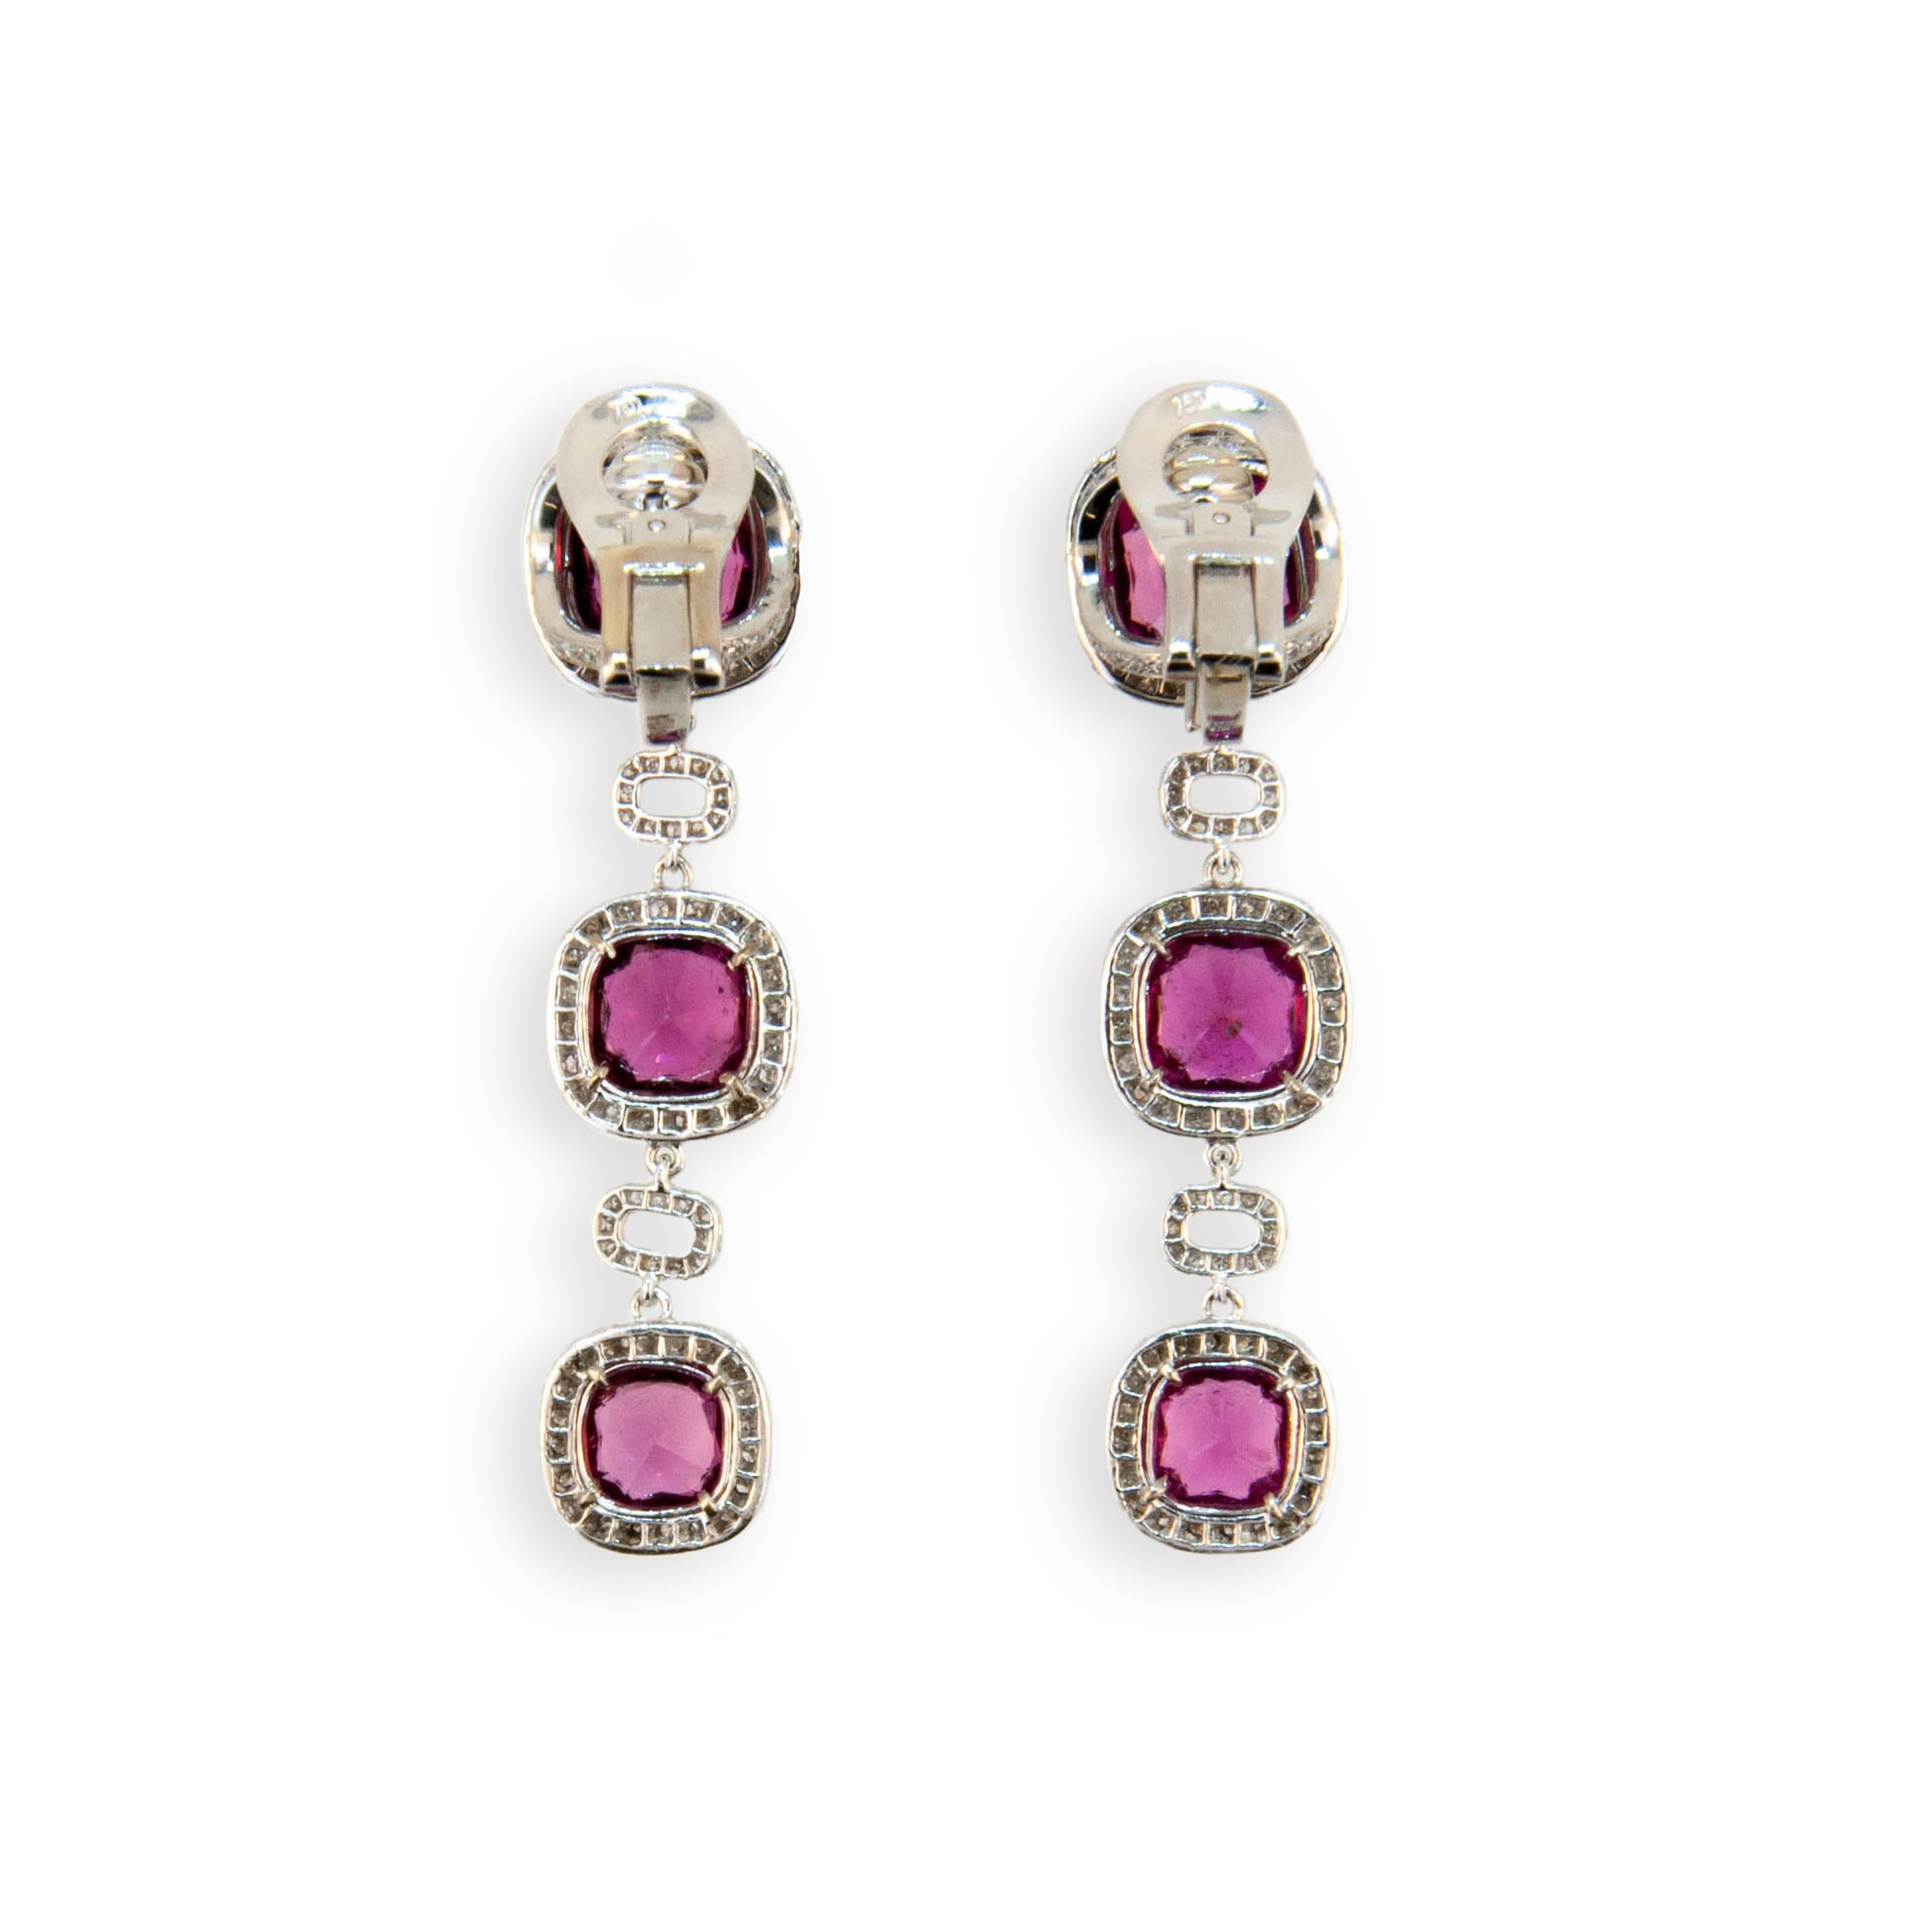 18 karat white gold earrings 9 x 9 mm Rubellite at top with two 8.5 mm and two 7.5 mm Rubellite below 11.57 carats total weight with micro set diamonds surrounding and rectangular diamond sections separating (four hundred sixty four diamonds) 3.01